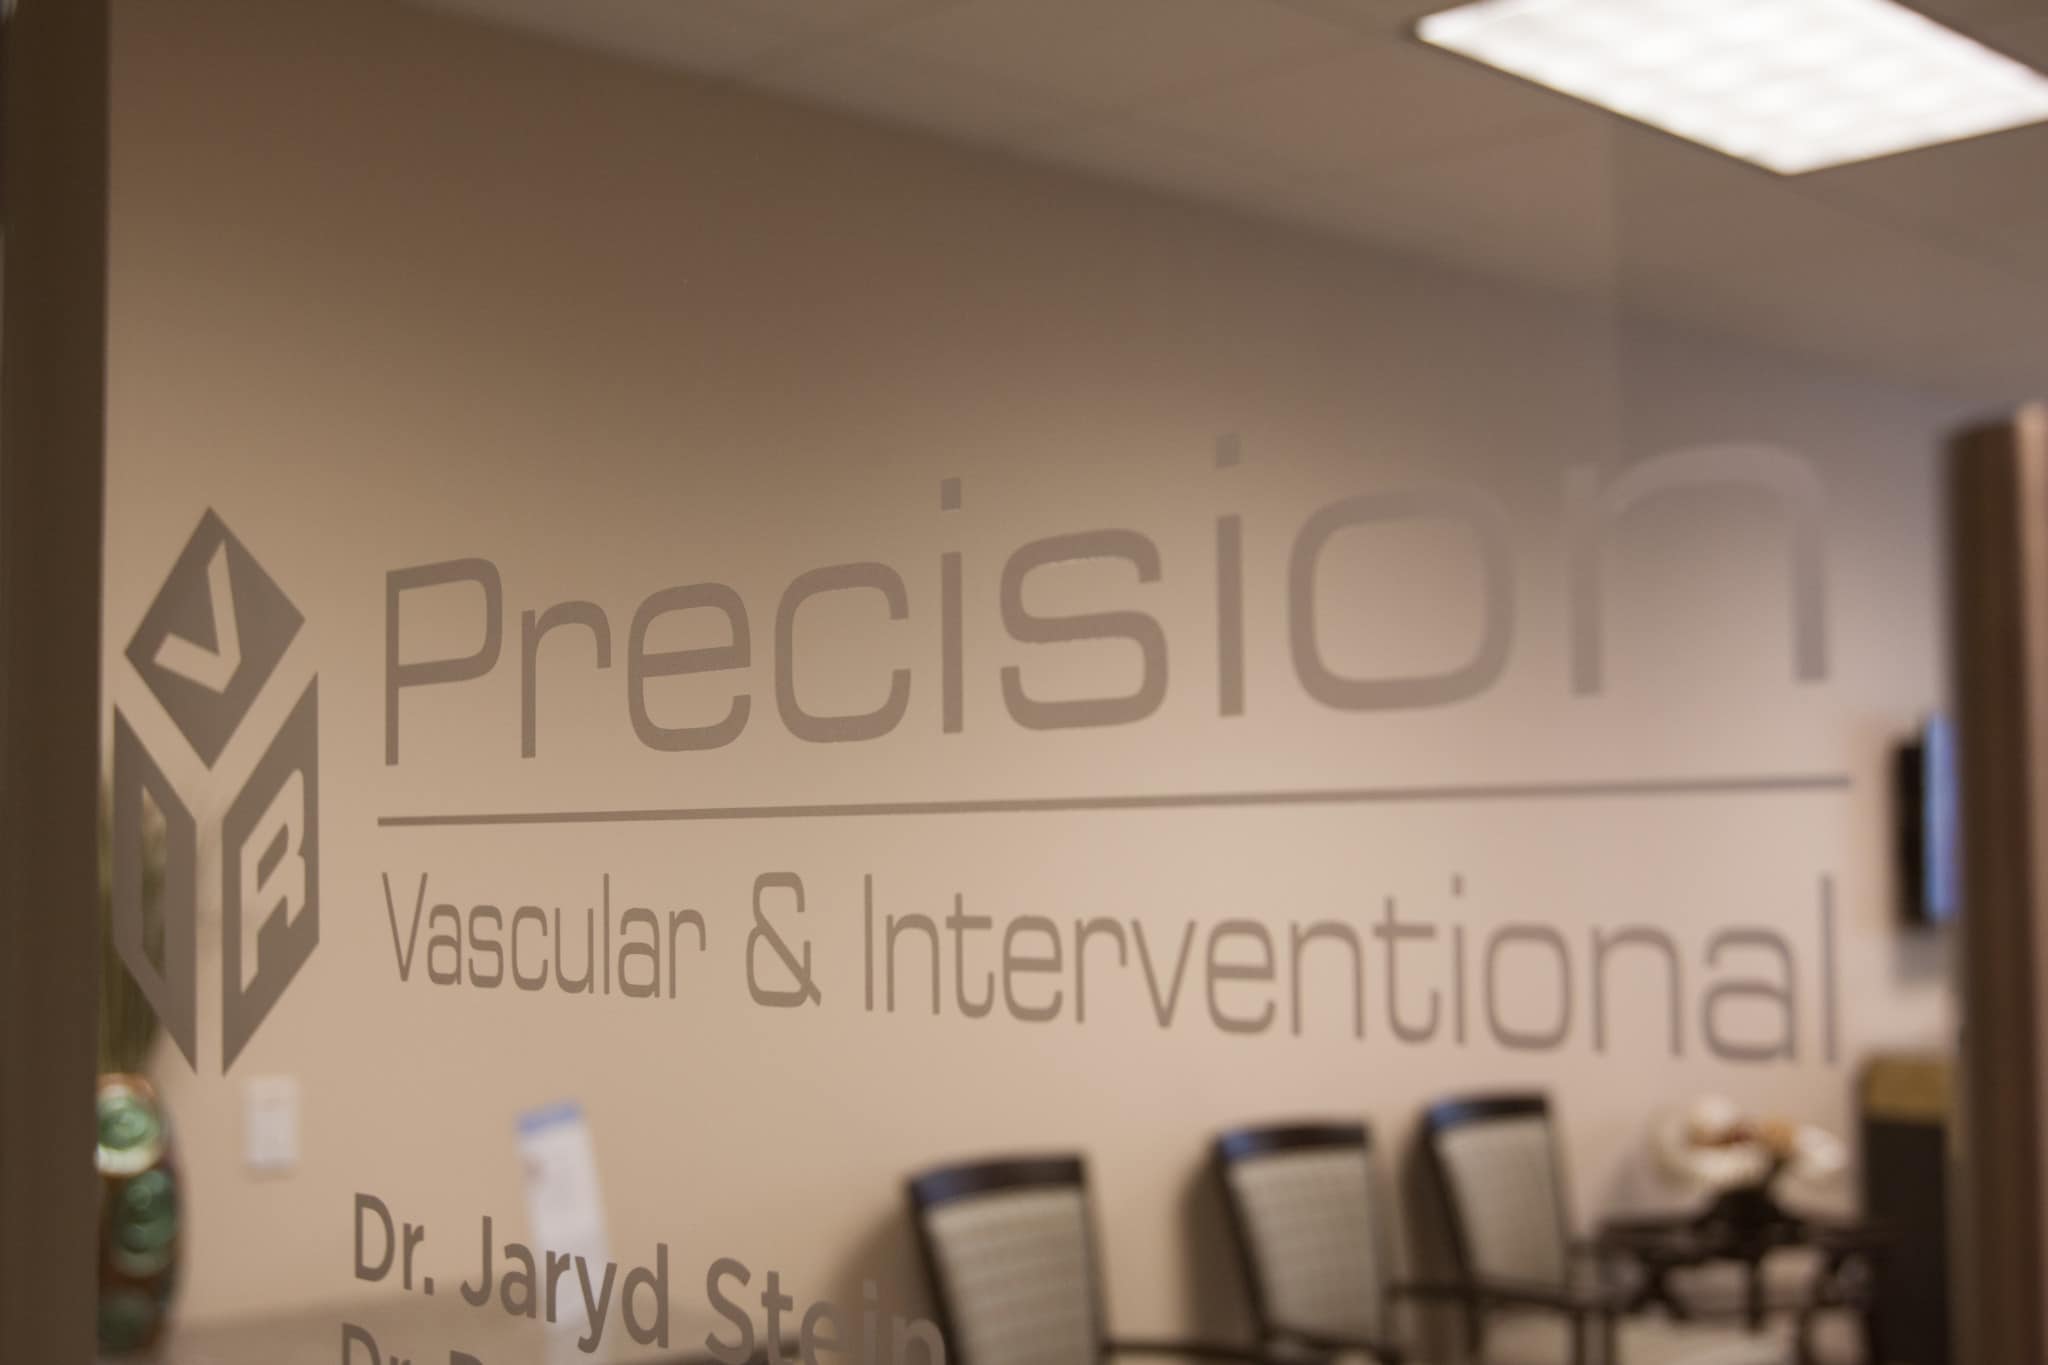 Common Conditions We Treat at Precision VIR